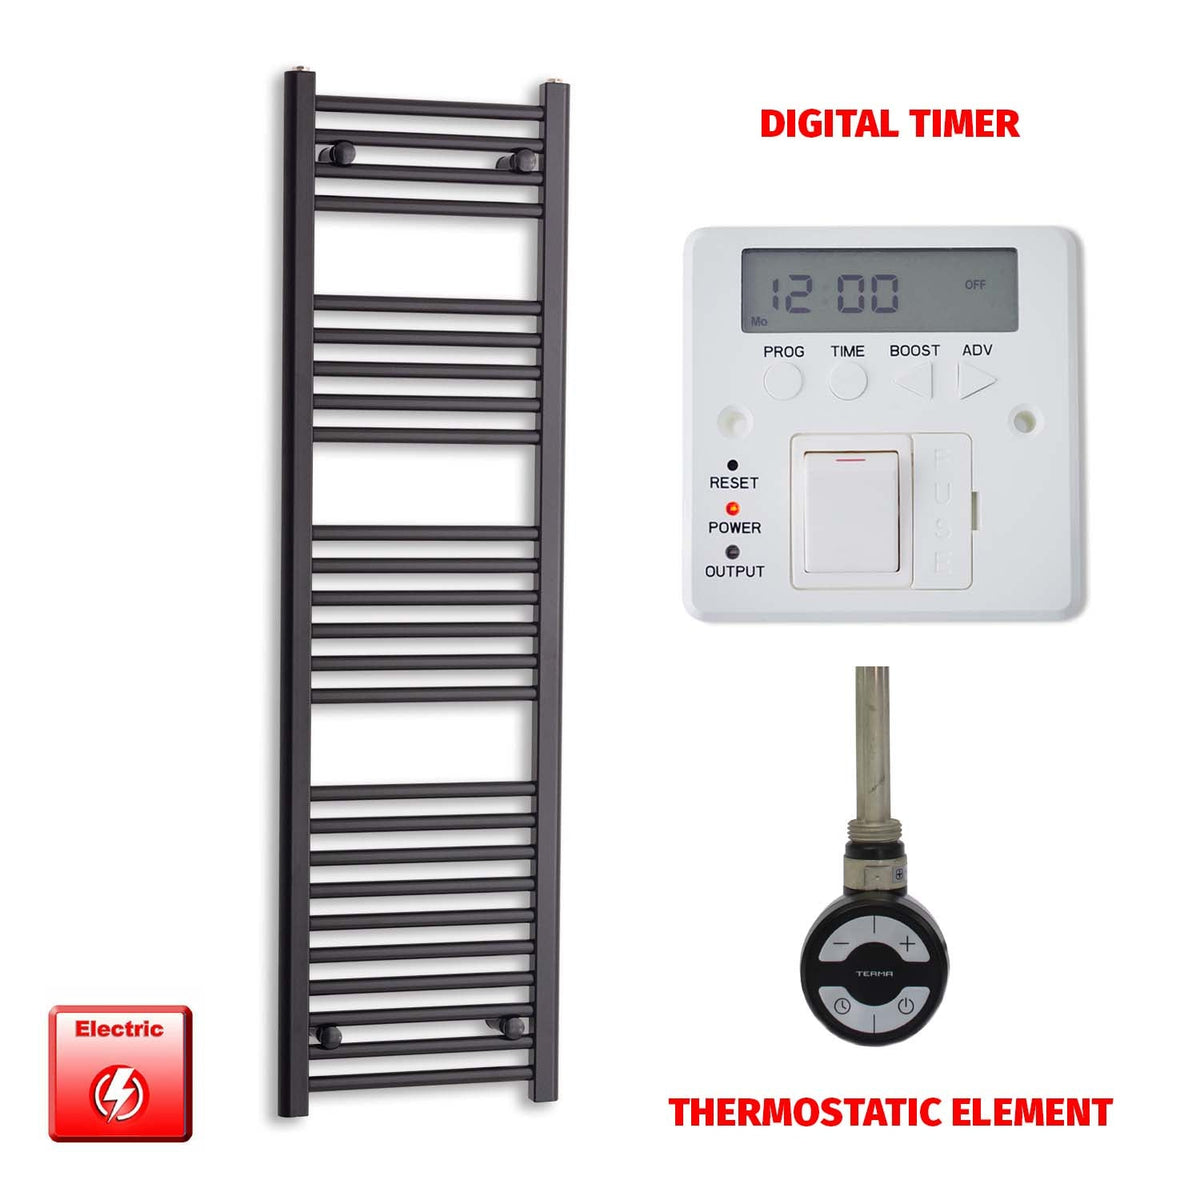 1400 x 400 Flat Black Pre-Filled Electric Heated Towel Radiator HTR MOA Thermostatic Digital Timer